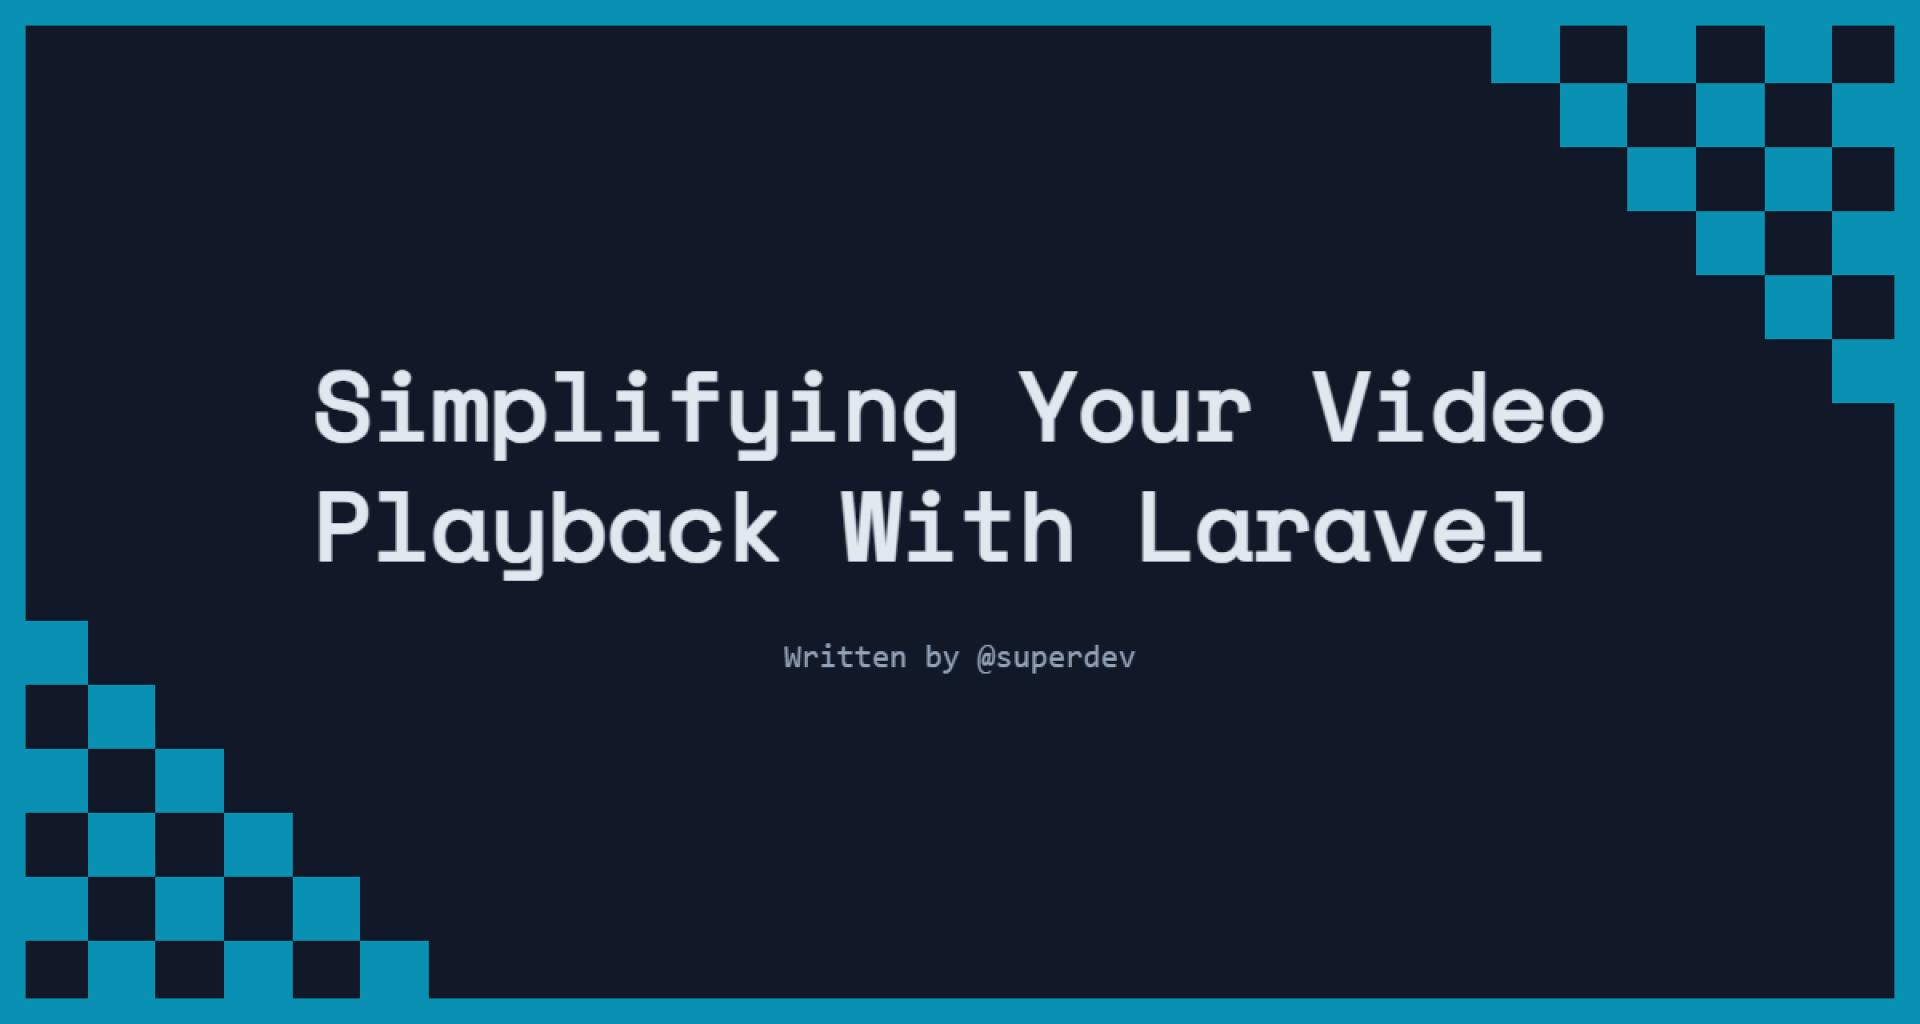 Simplifying Your Video Playback With Laravel